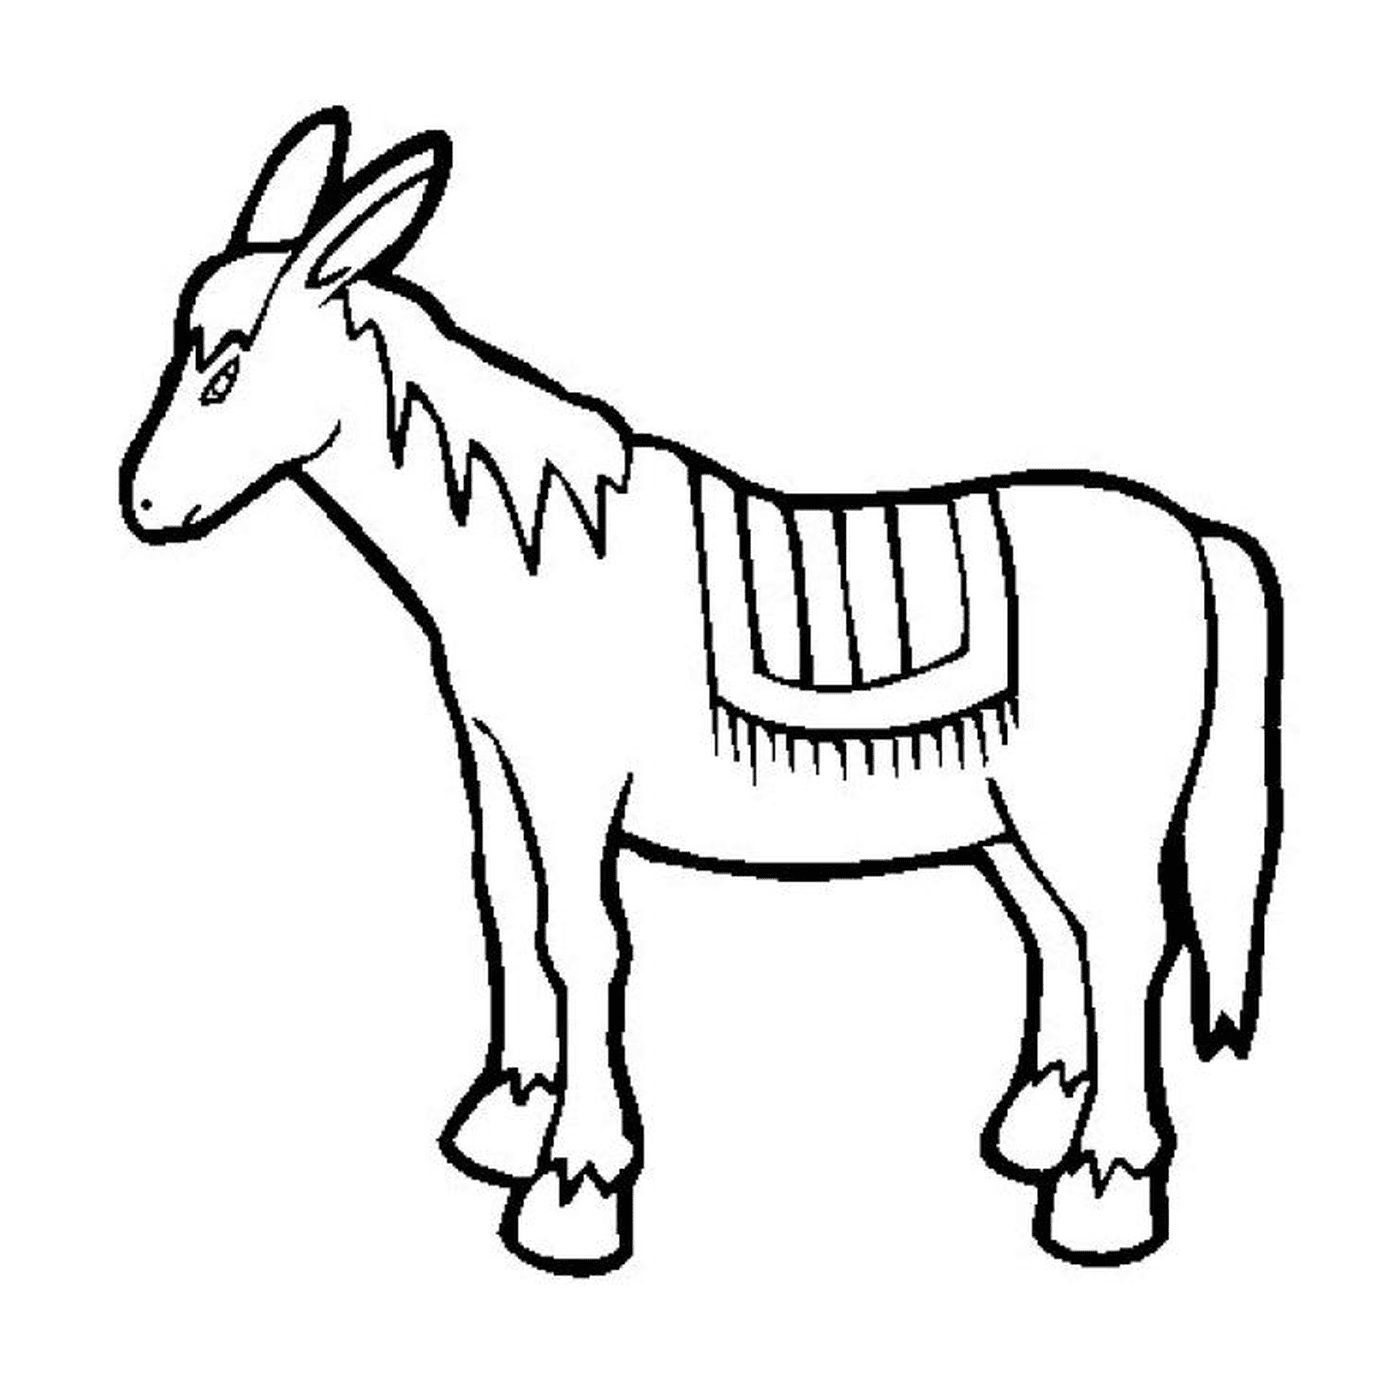  An image of a drawn animal 